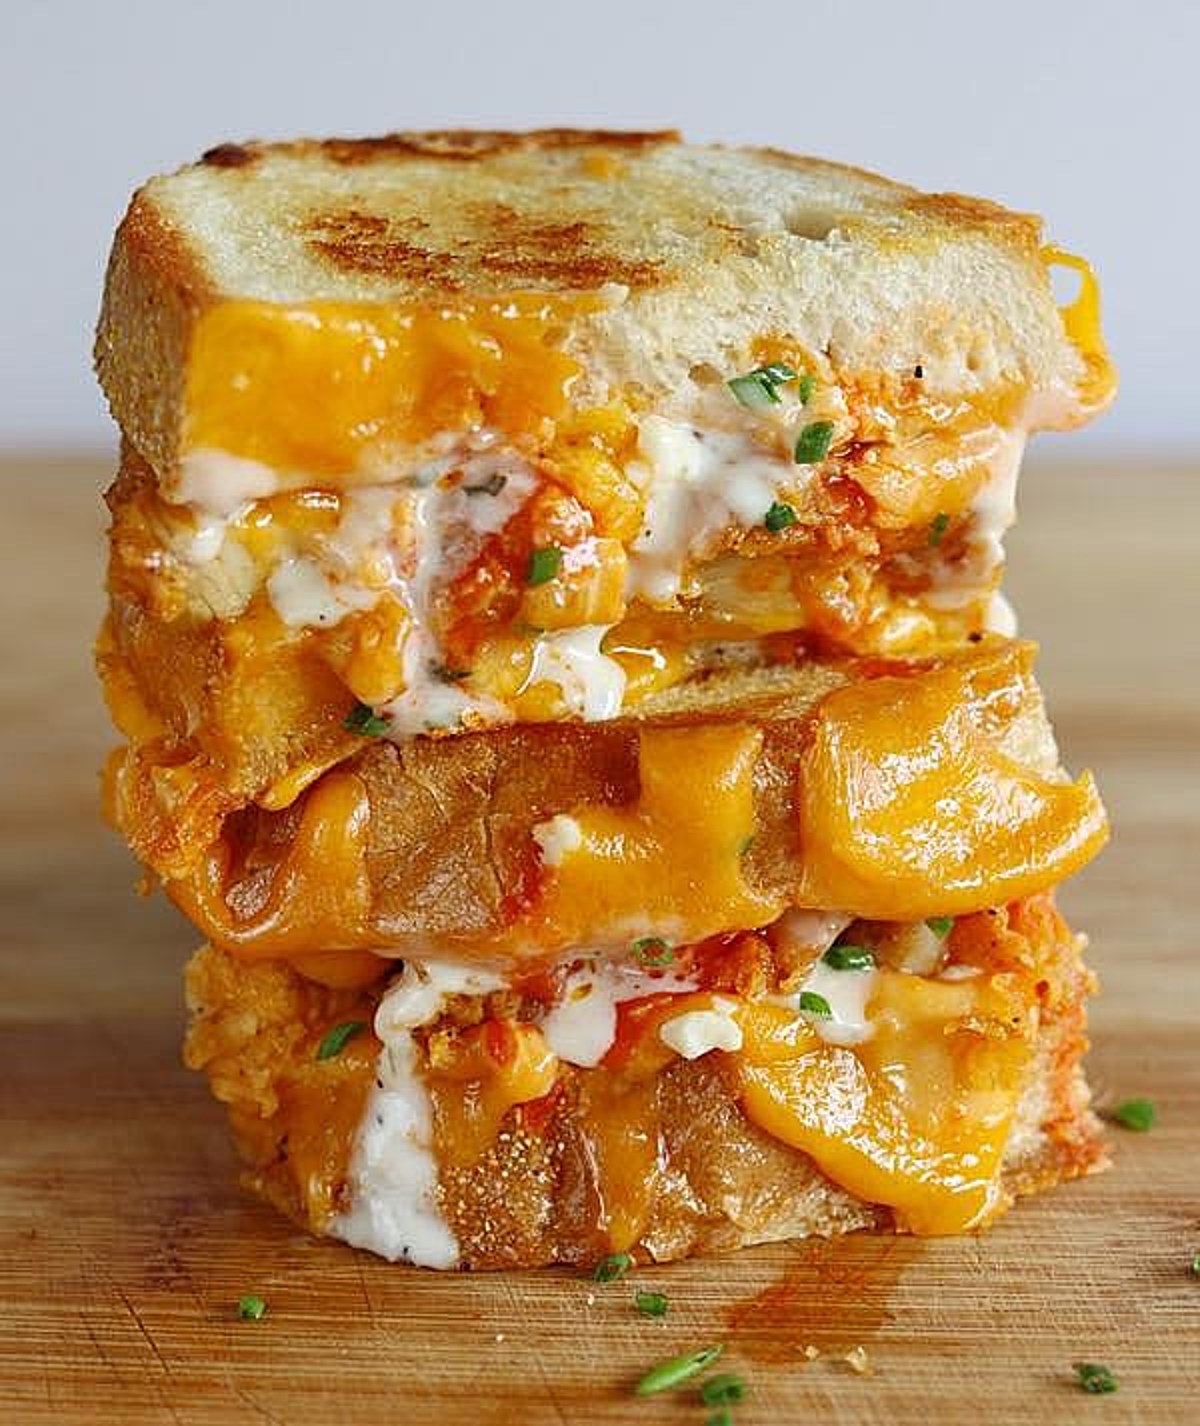 Sheet Pan Grilled Cheese Sandwiches - The BakerMama